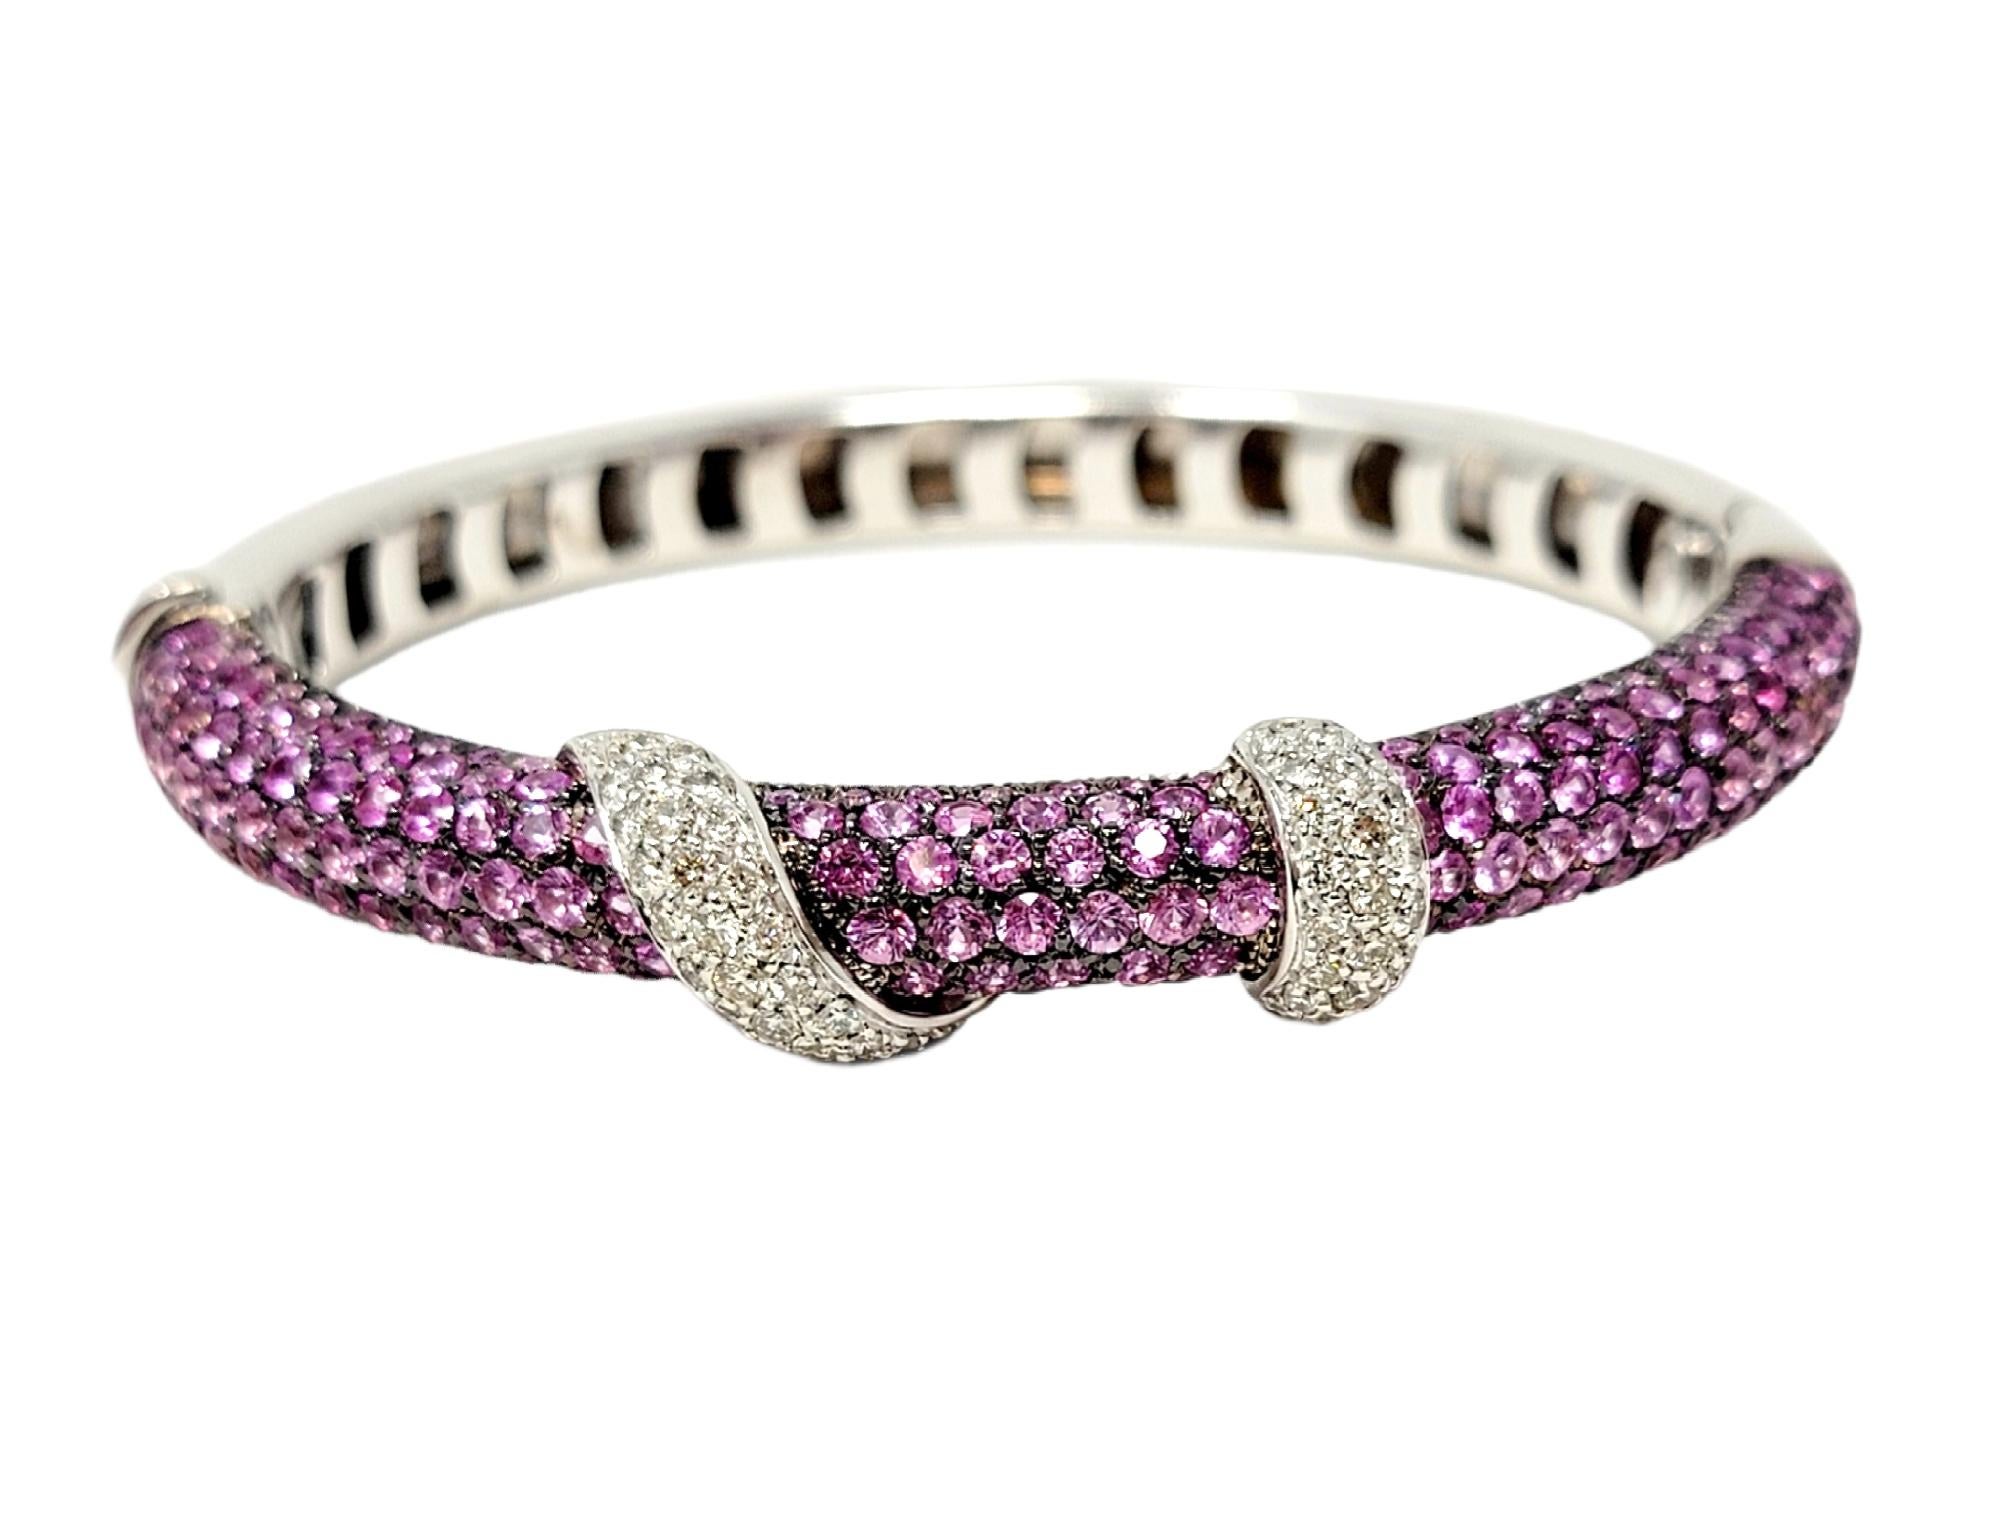 Andreoli Pink Sapphire and Diamond Wrap Hinged Bangle Bracelet Cuff For Sale 7